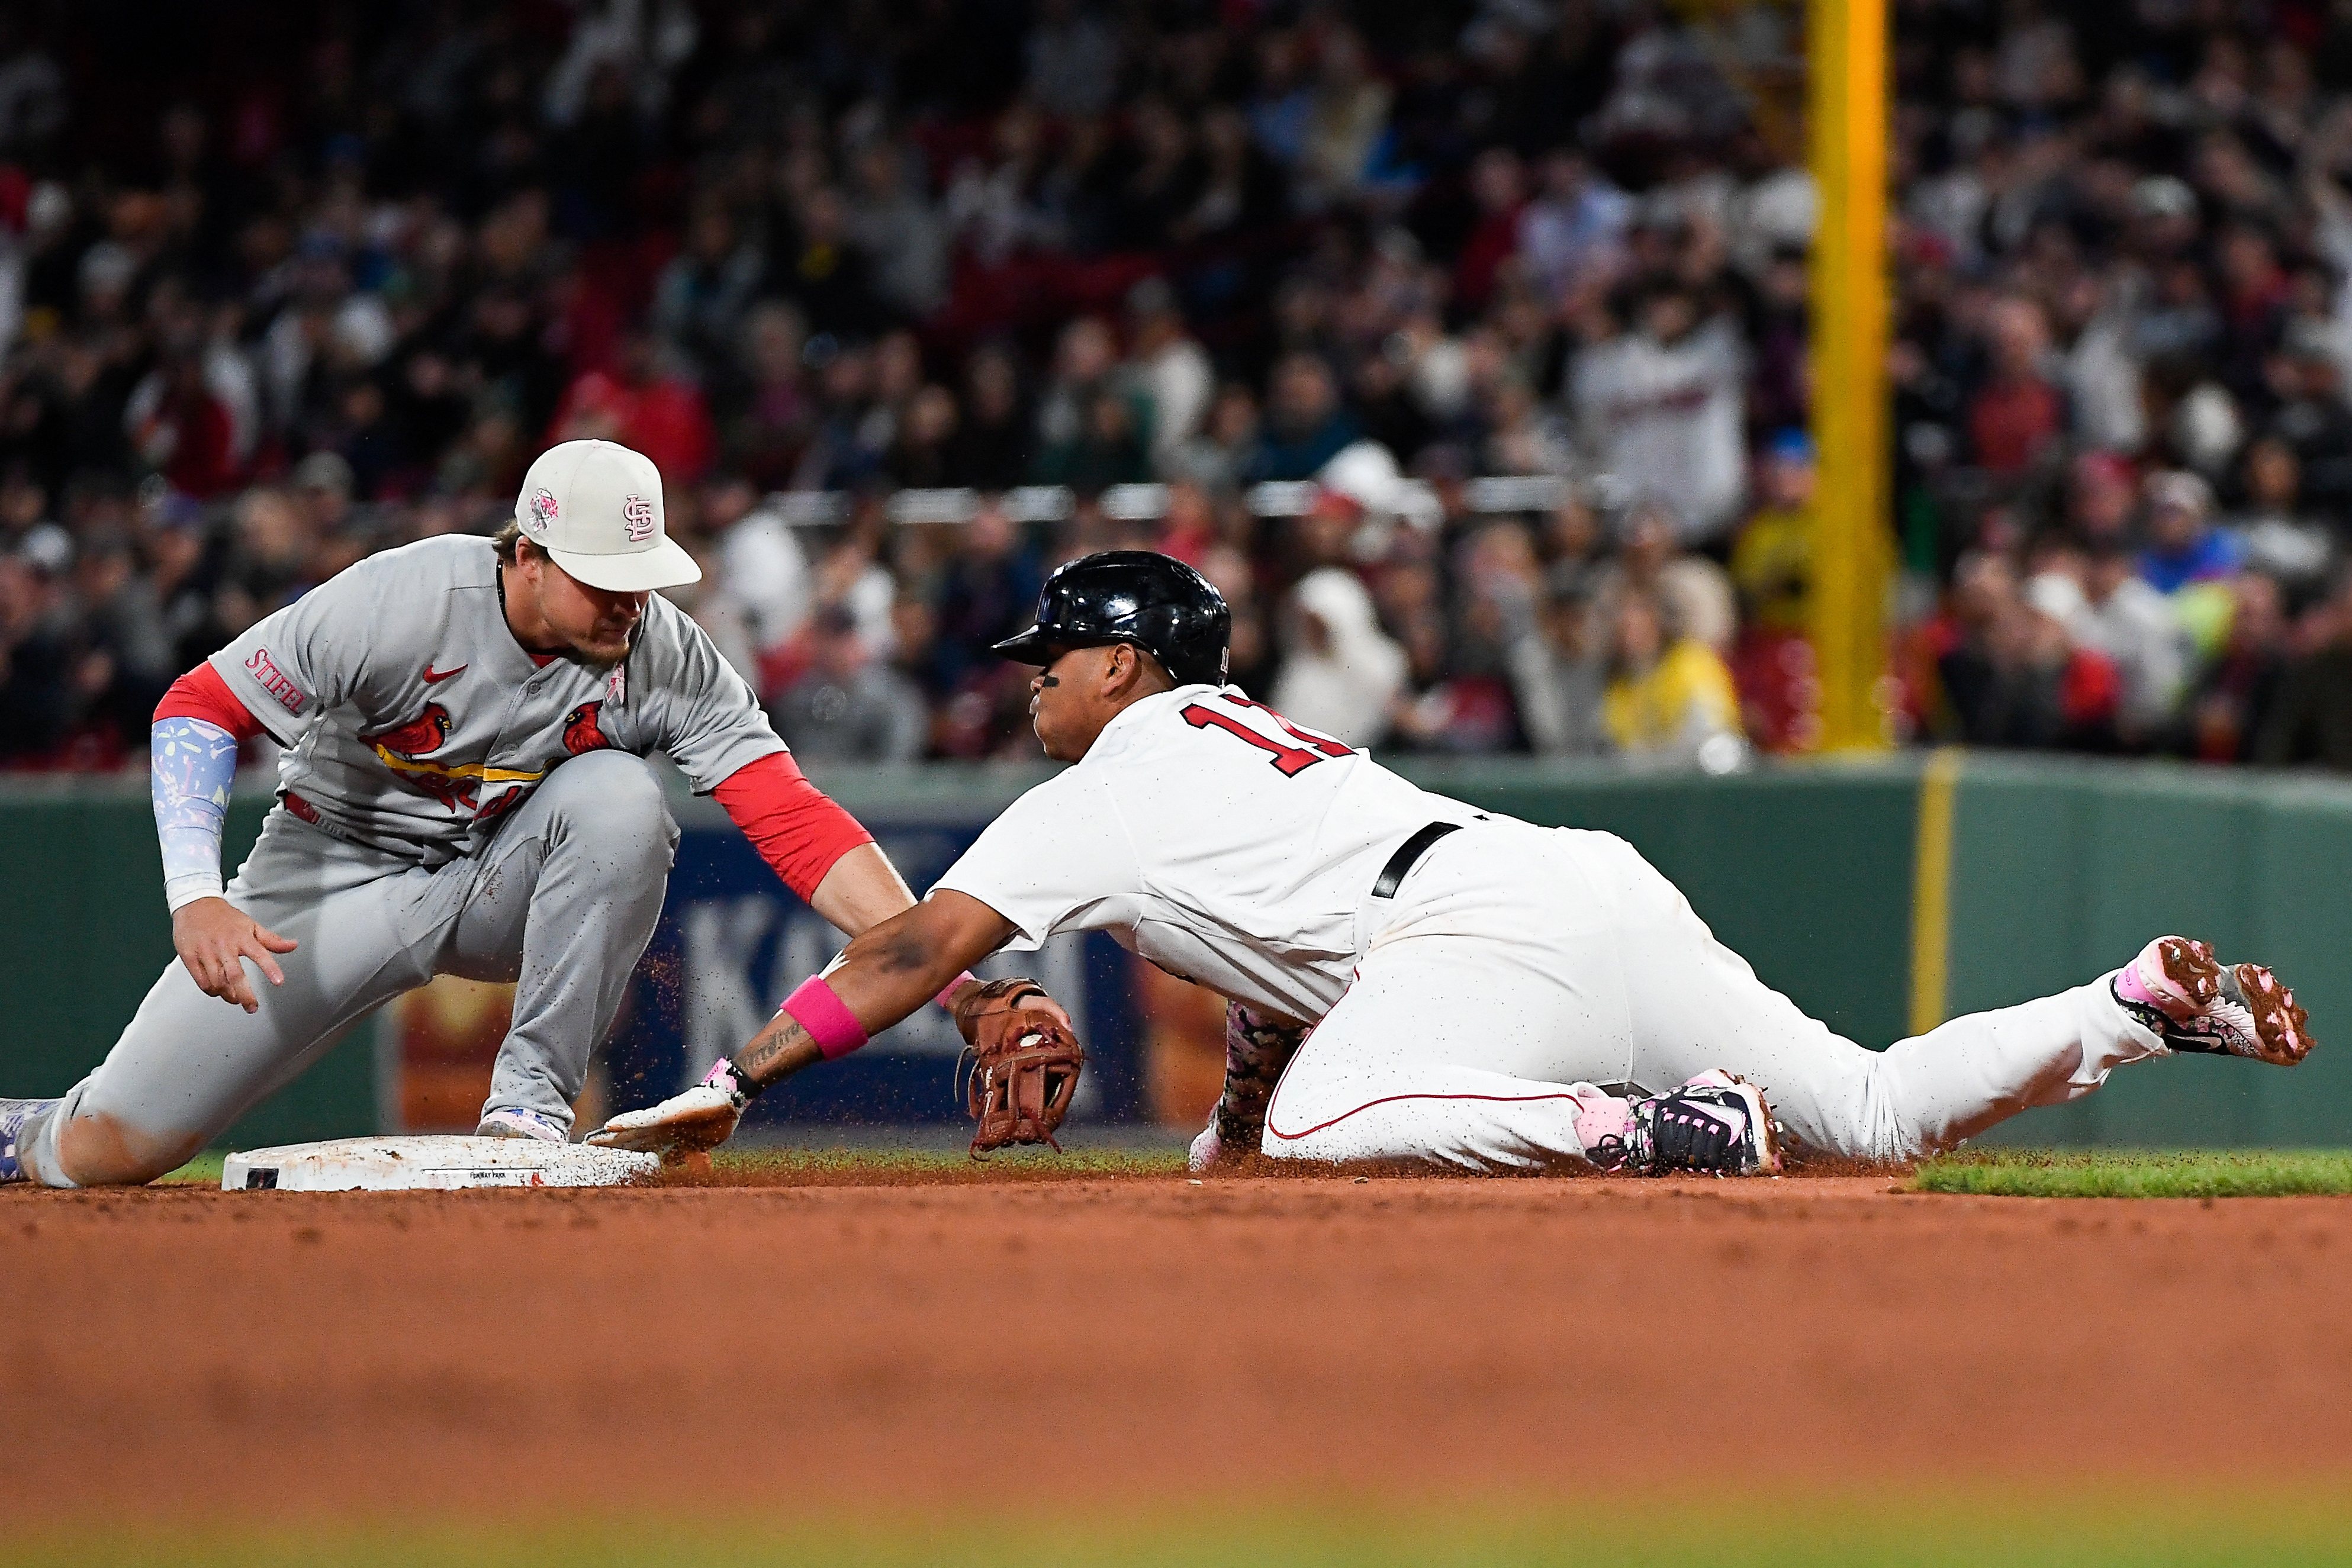 Red Sox routed by Cardinals as St. Louis completes sweep